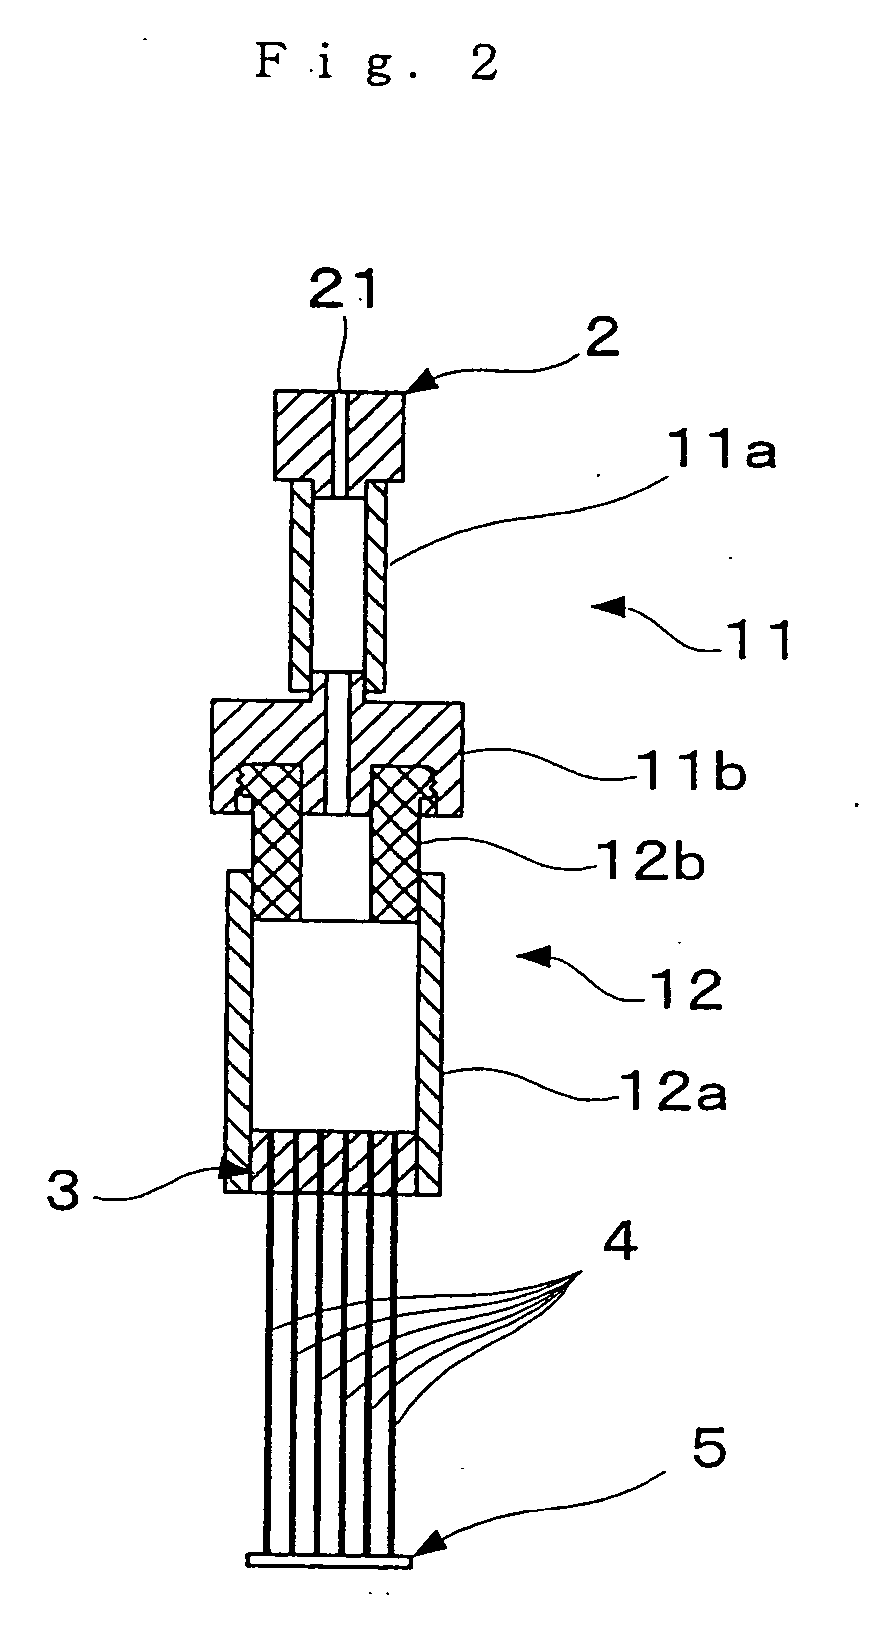 Methods of culturing, storing, and inducing differentiation in cells, instrument for use in the methods, method of using the instrument, and medical biomaterial